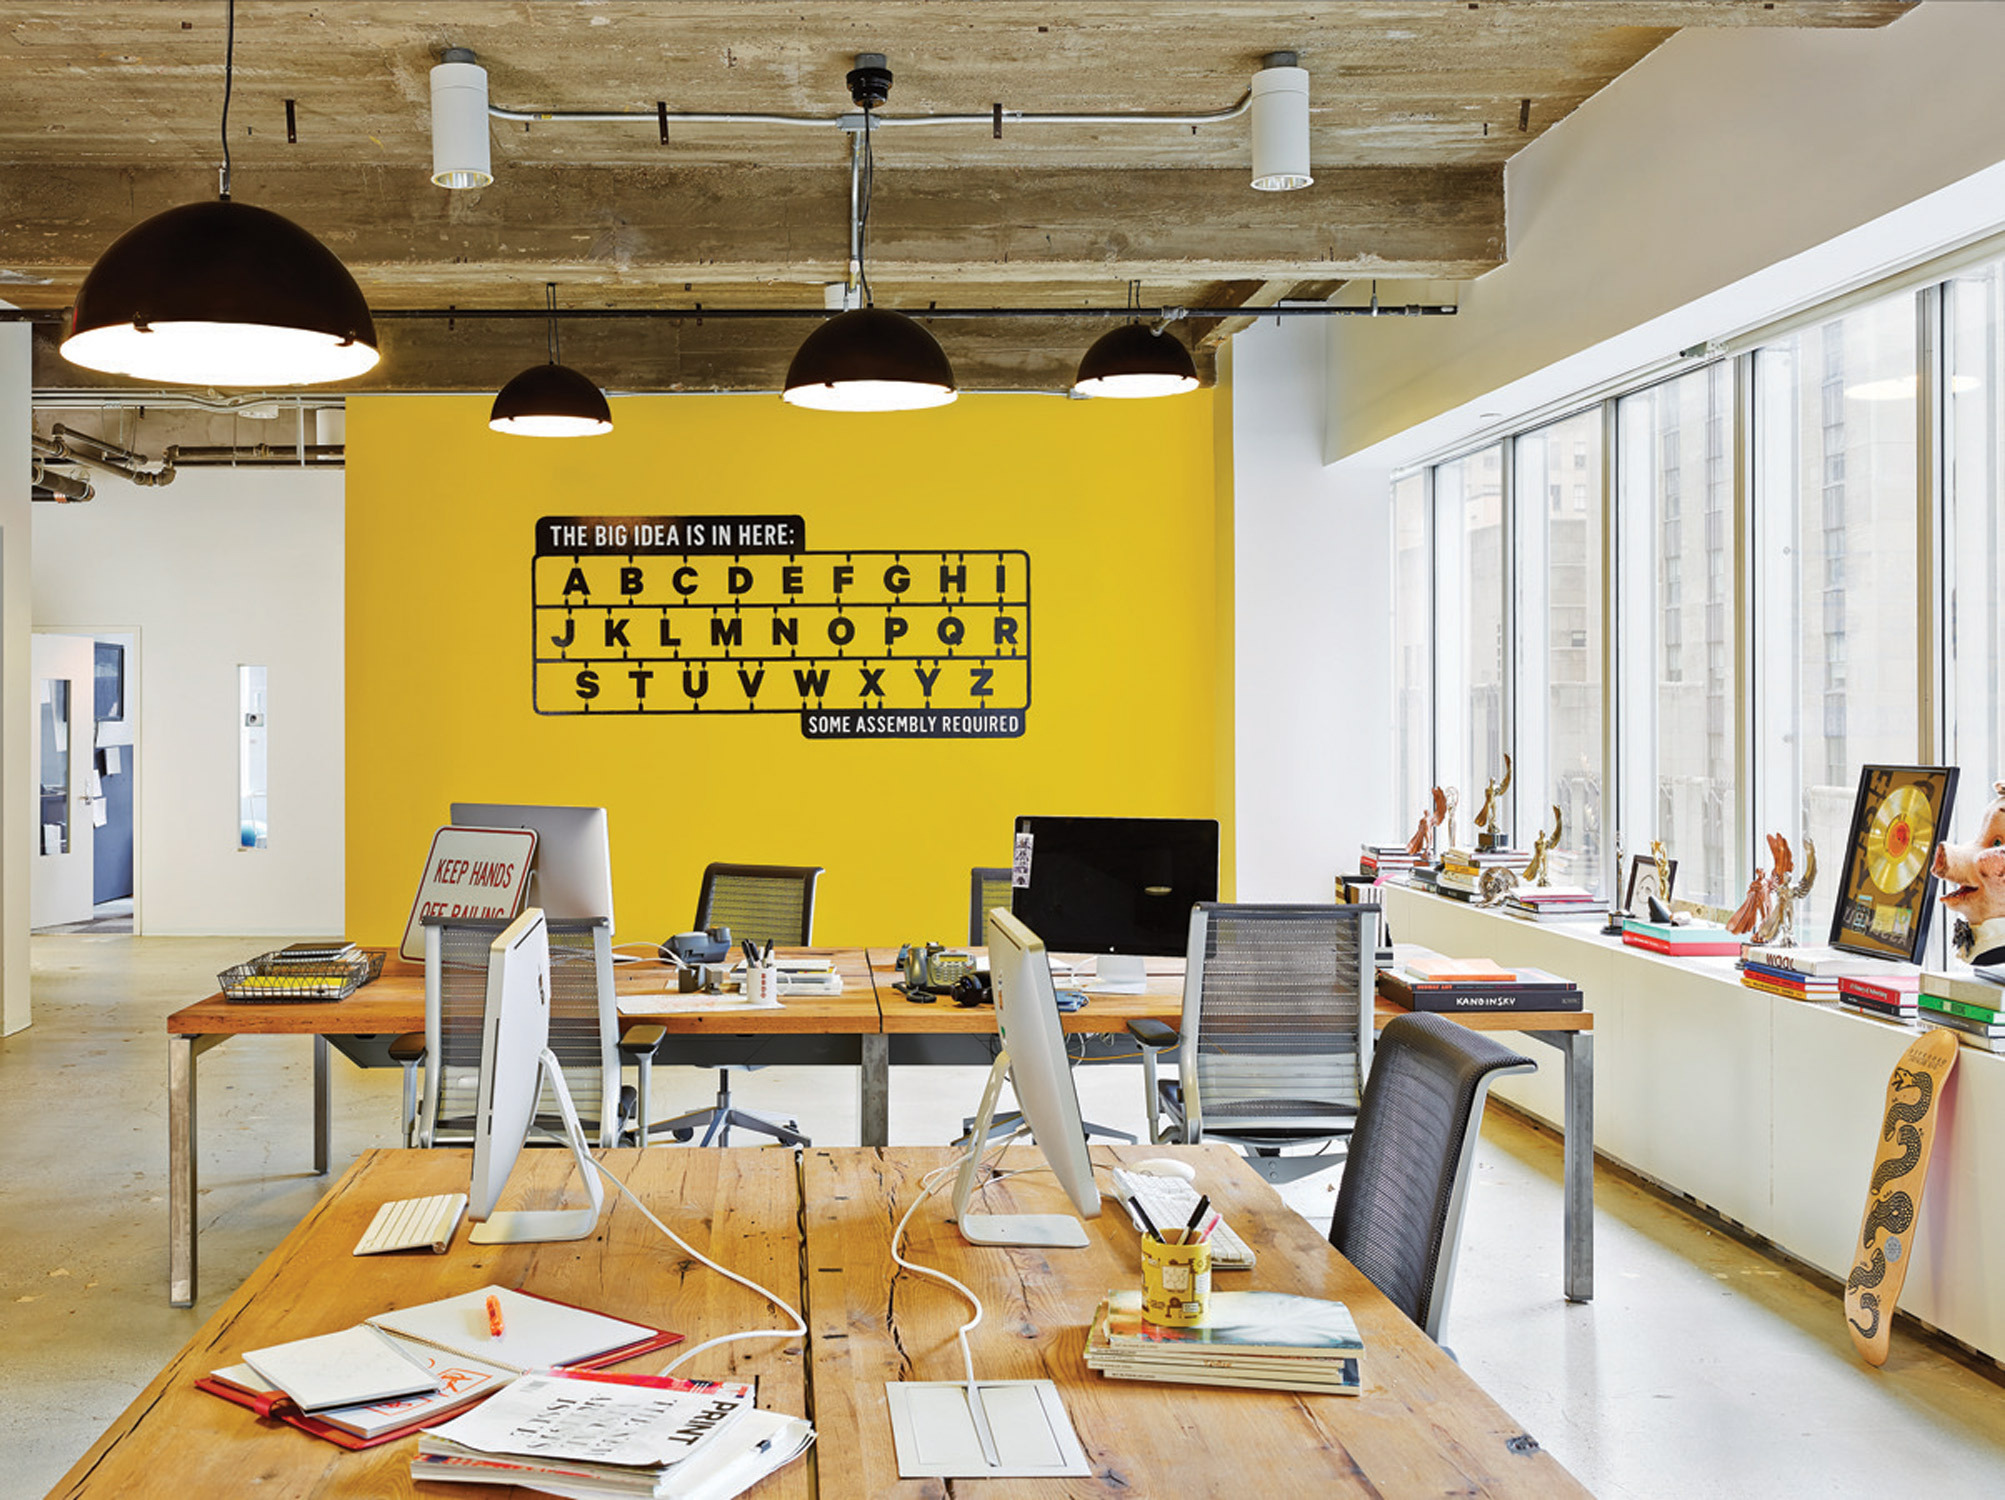 Lively office space with a yellow accent wall featuring typographic art, surrounded by workstations with exposed concrete ceilings.